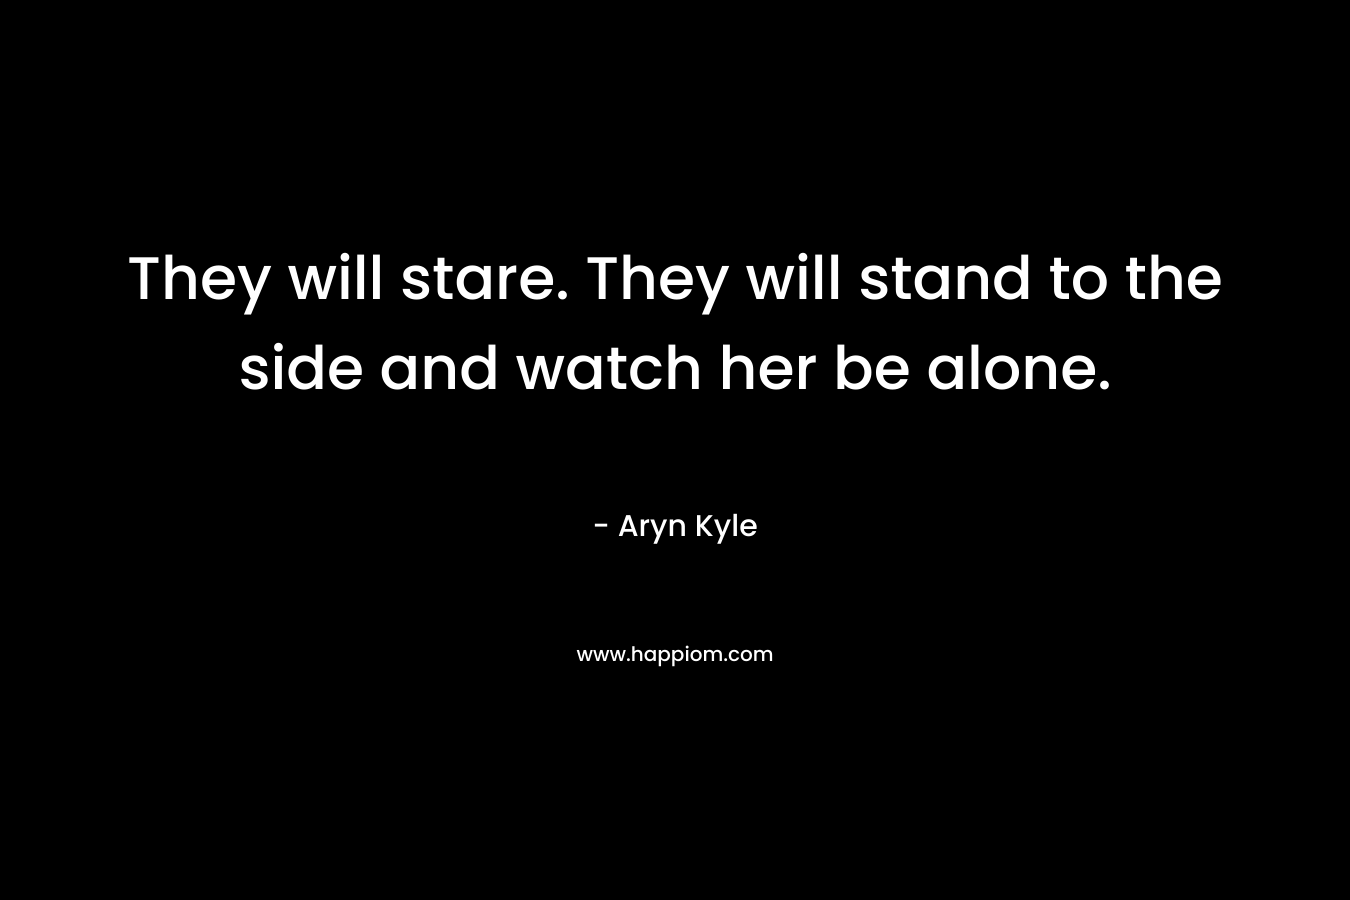 They will stare. They will stand to the side and watch her be alone. – Aryn Kyle